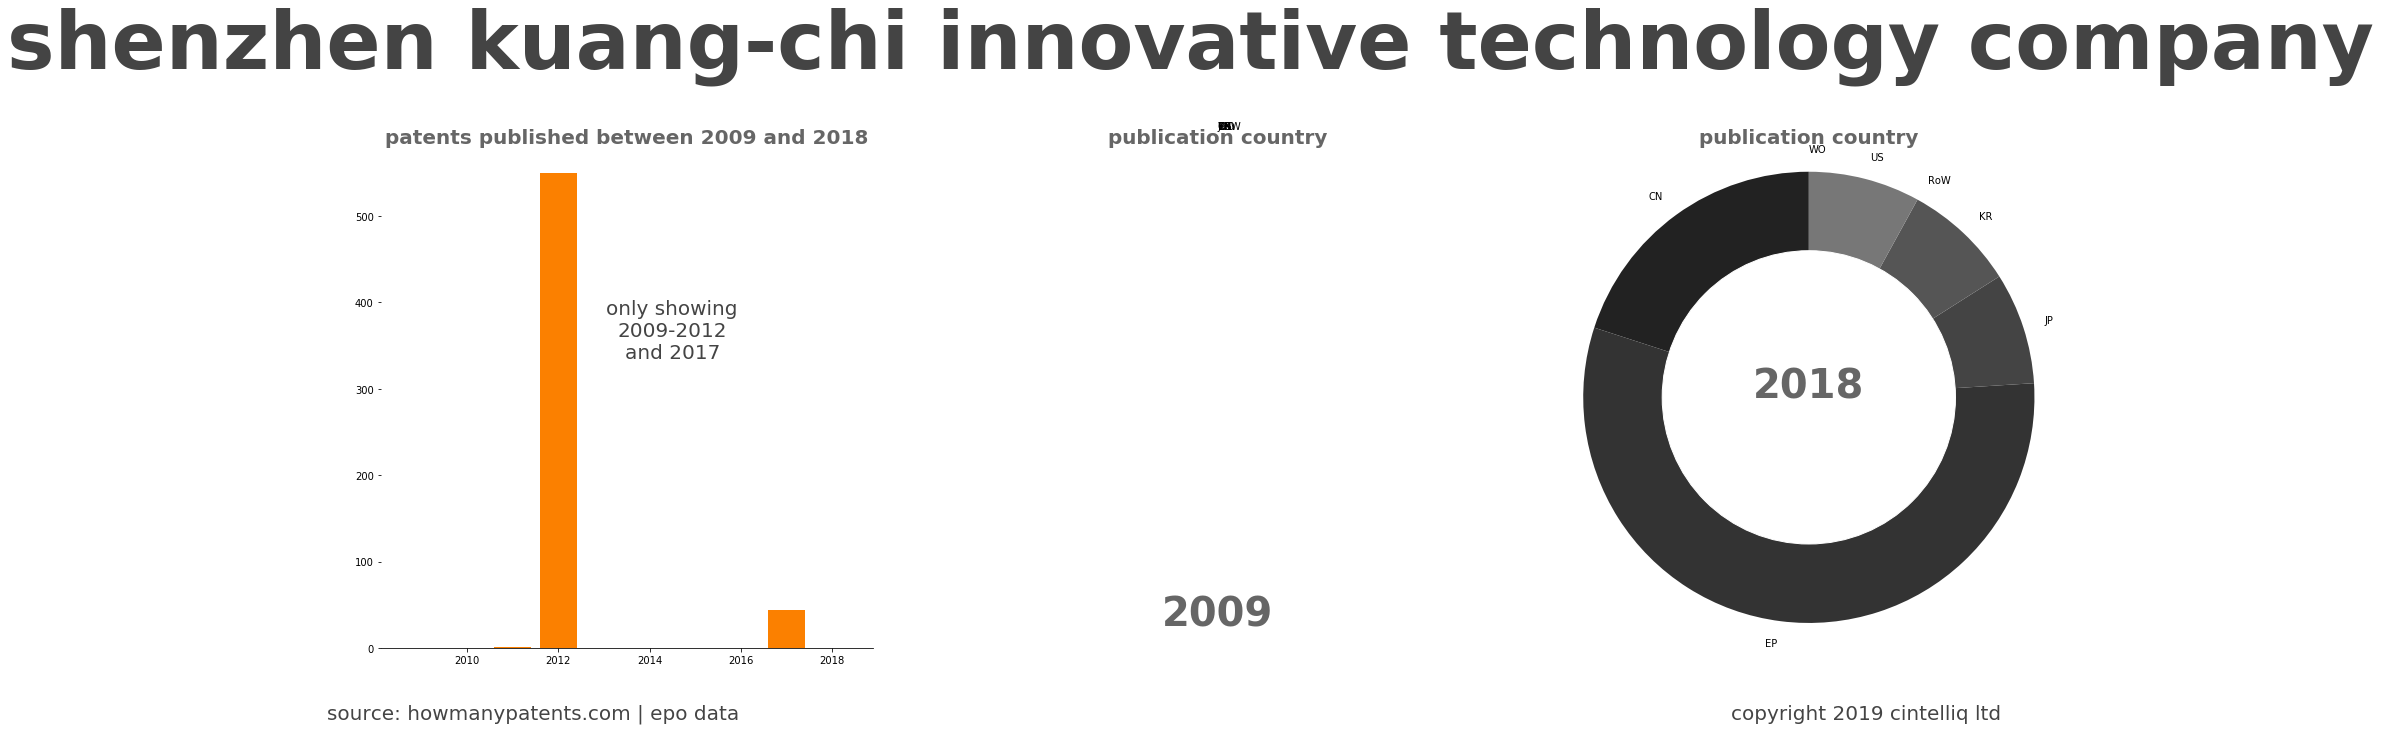 summary of patents for Shenzhen Kuang-Chi Innovative Technology Company